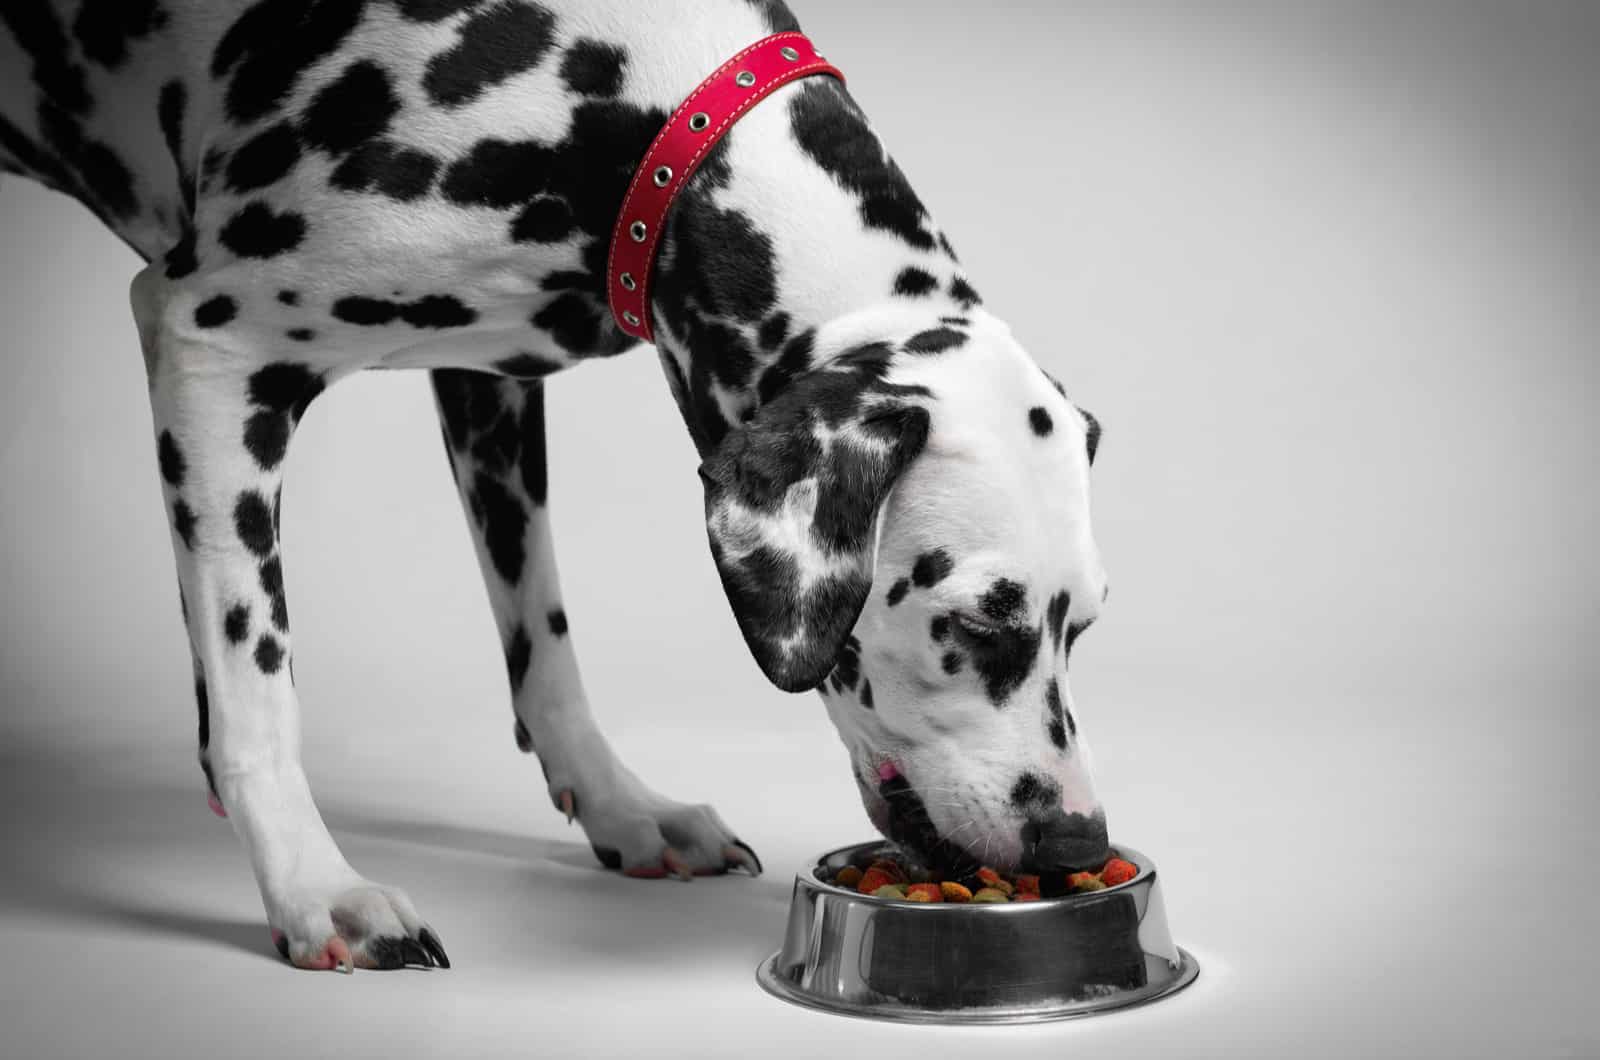 dalmatian eating food from a bowl